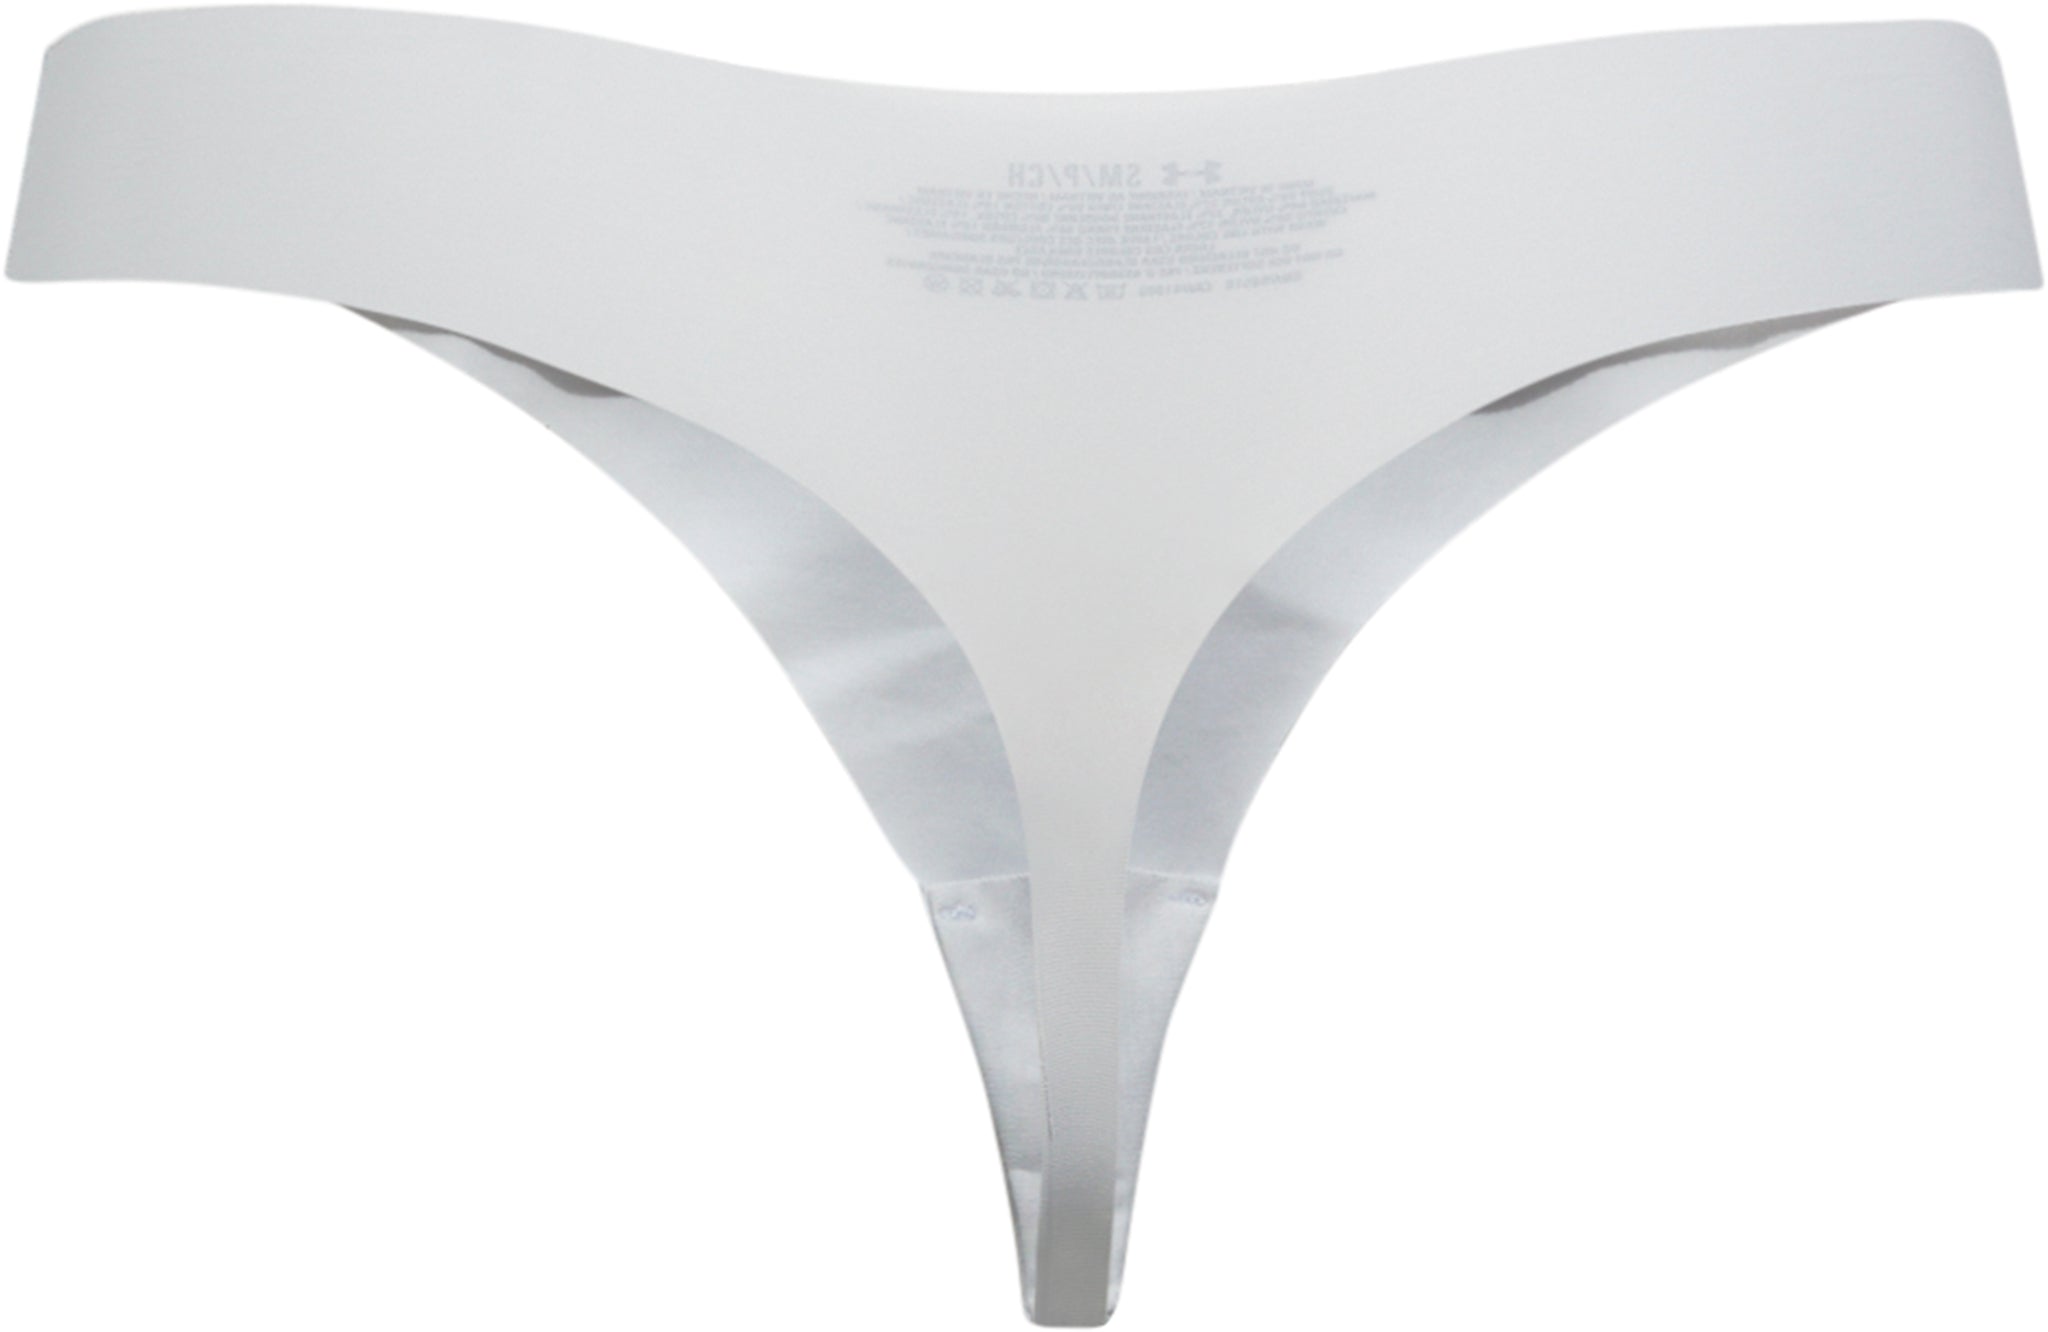 Under Armour Pure Stretch Thong Panty 1275732